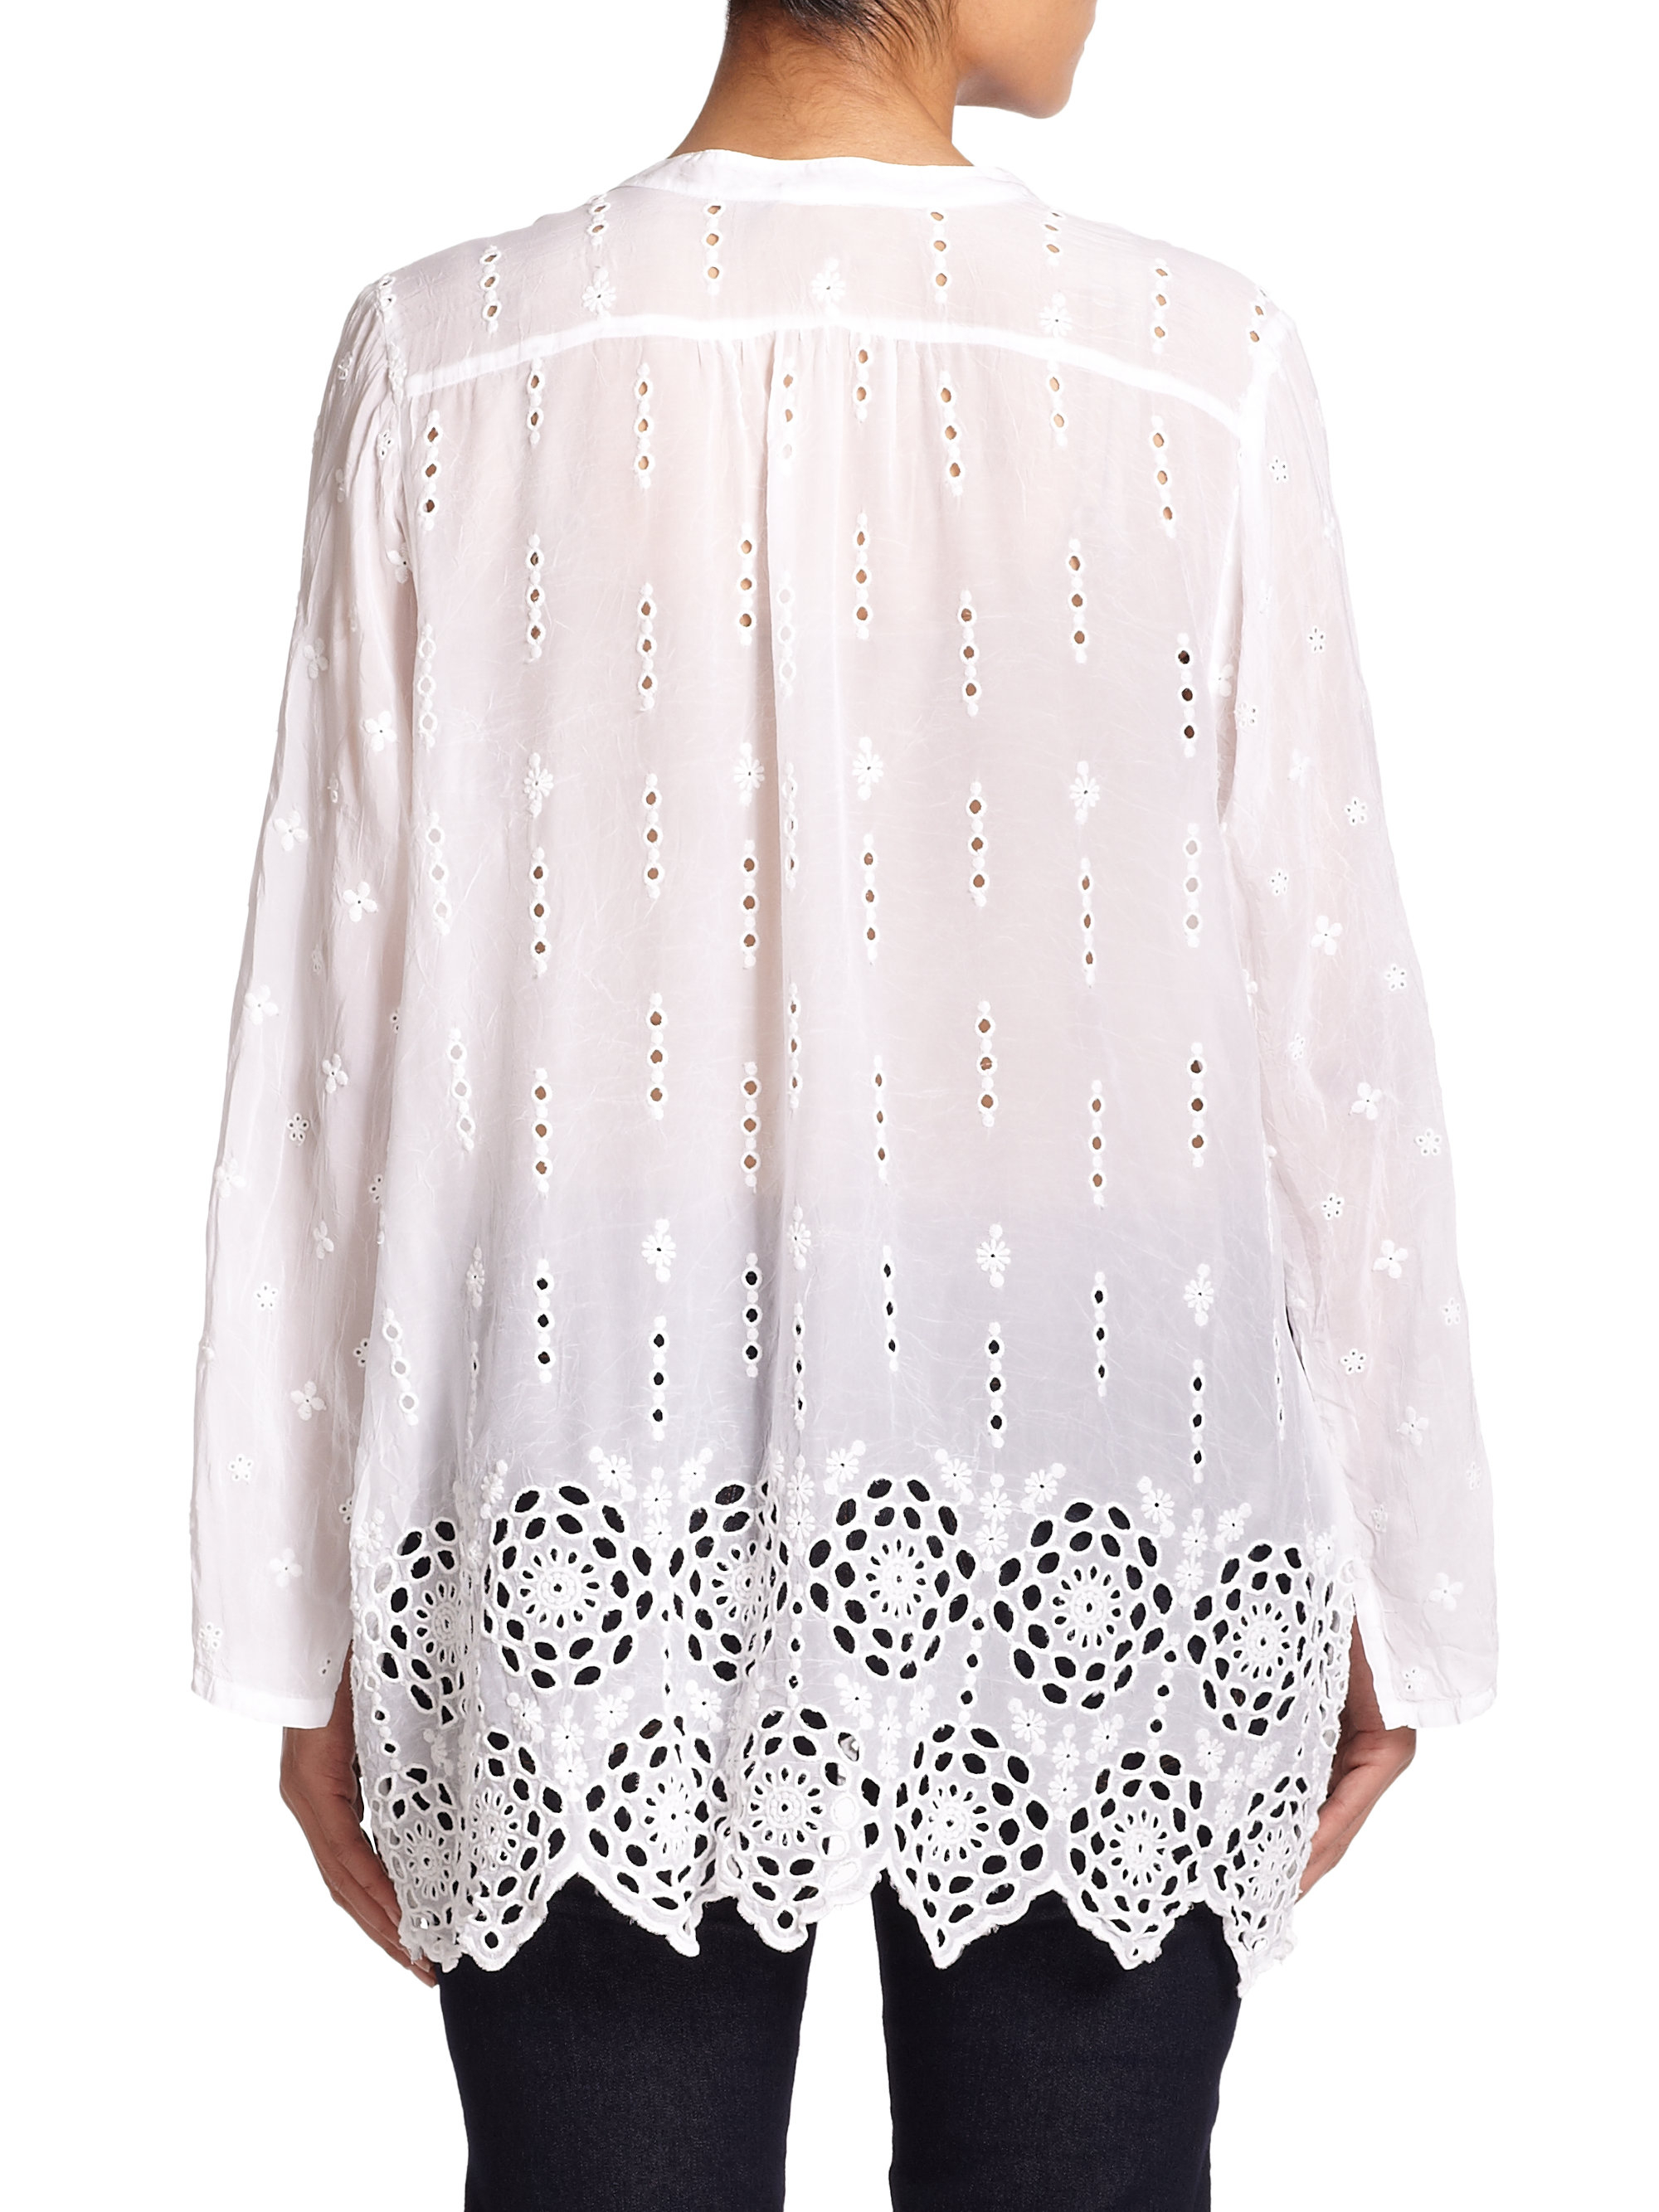 Johnny Was Eyelet Top in White - Lyst